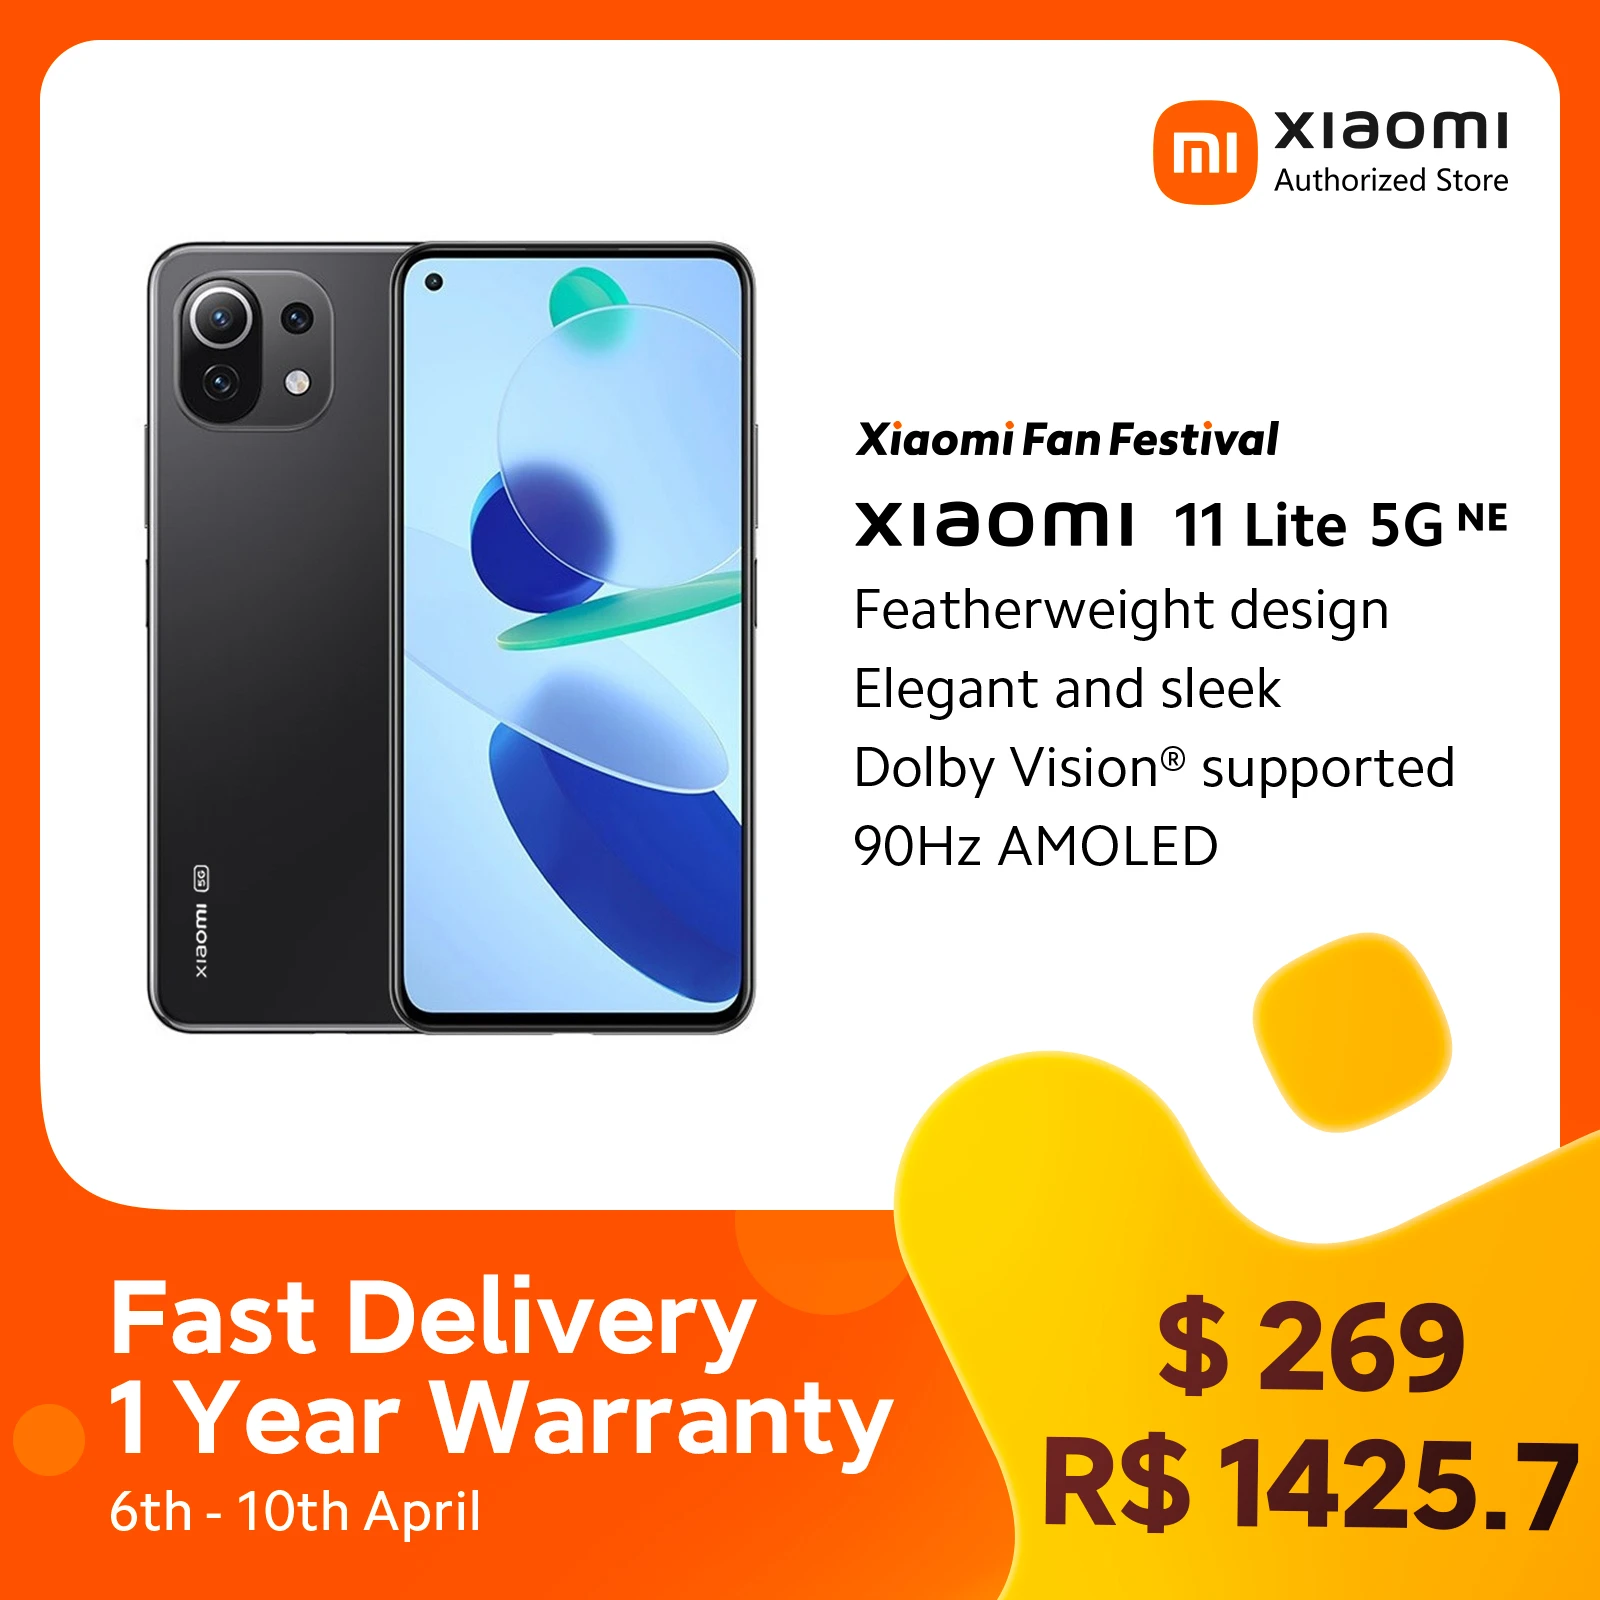 Global Version Xiaomi 11 Lite 5G NE 6GB/8GB 128GB/256GB NFC Smartphone Snapdragon 778G Octa Core 64MP Rear Camera 4250mAh top rated android cell phones